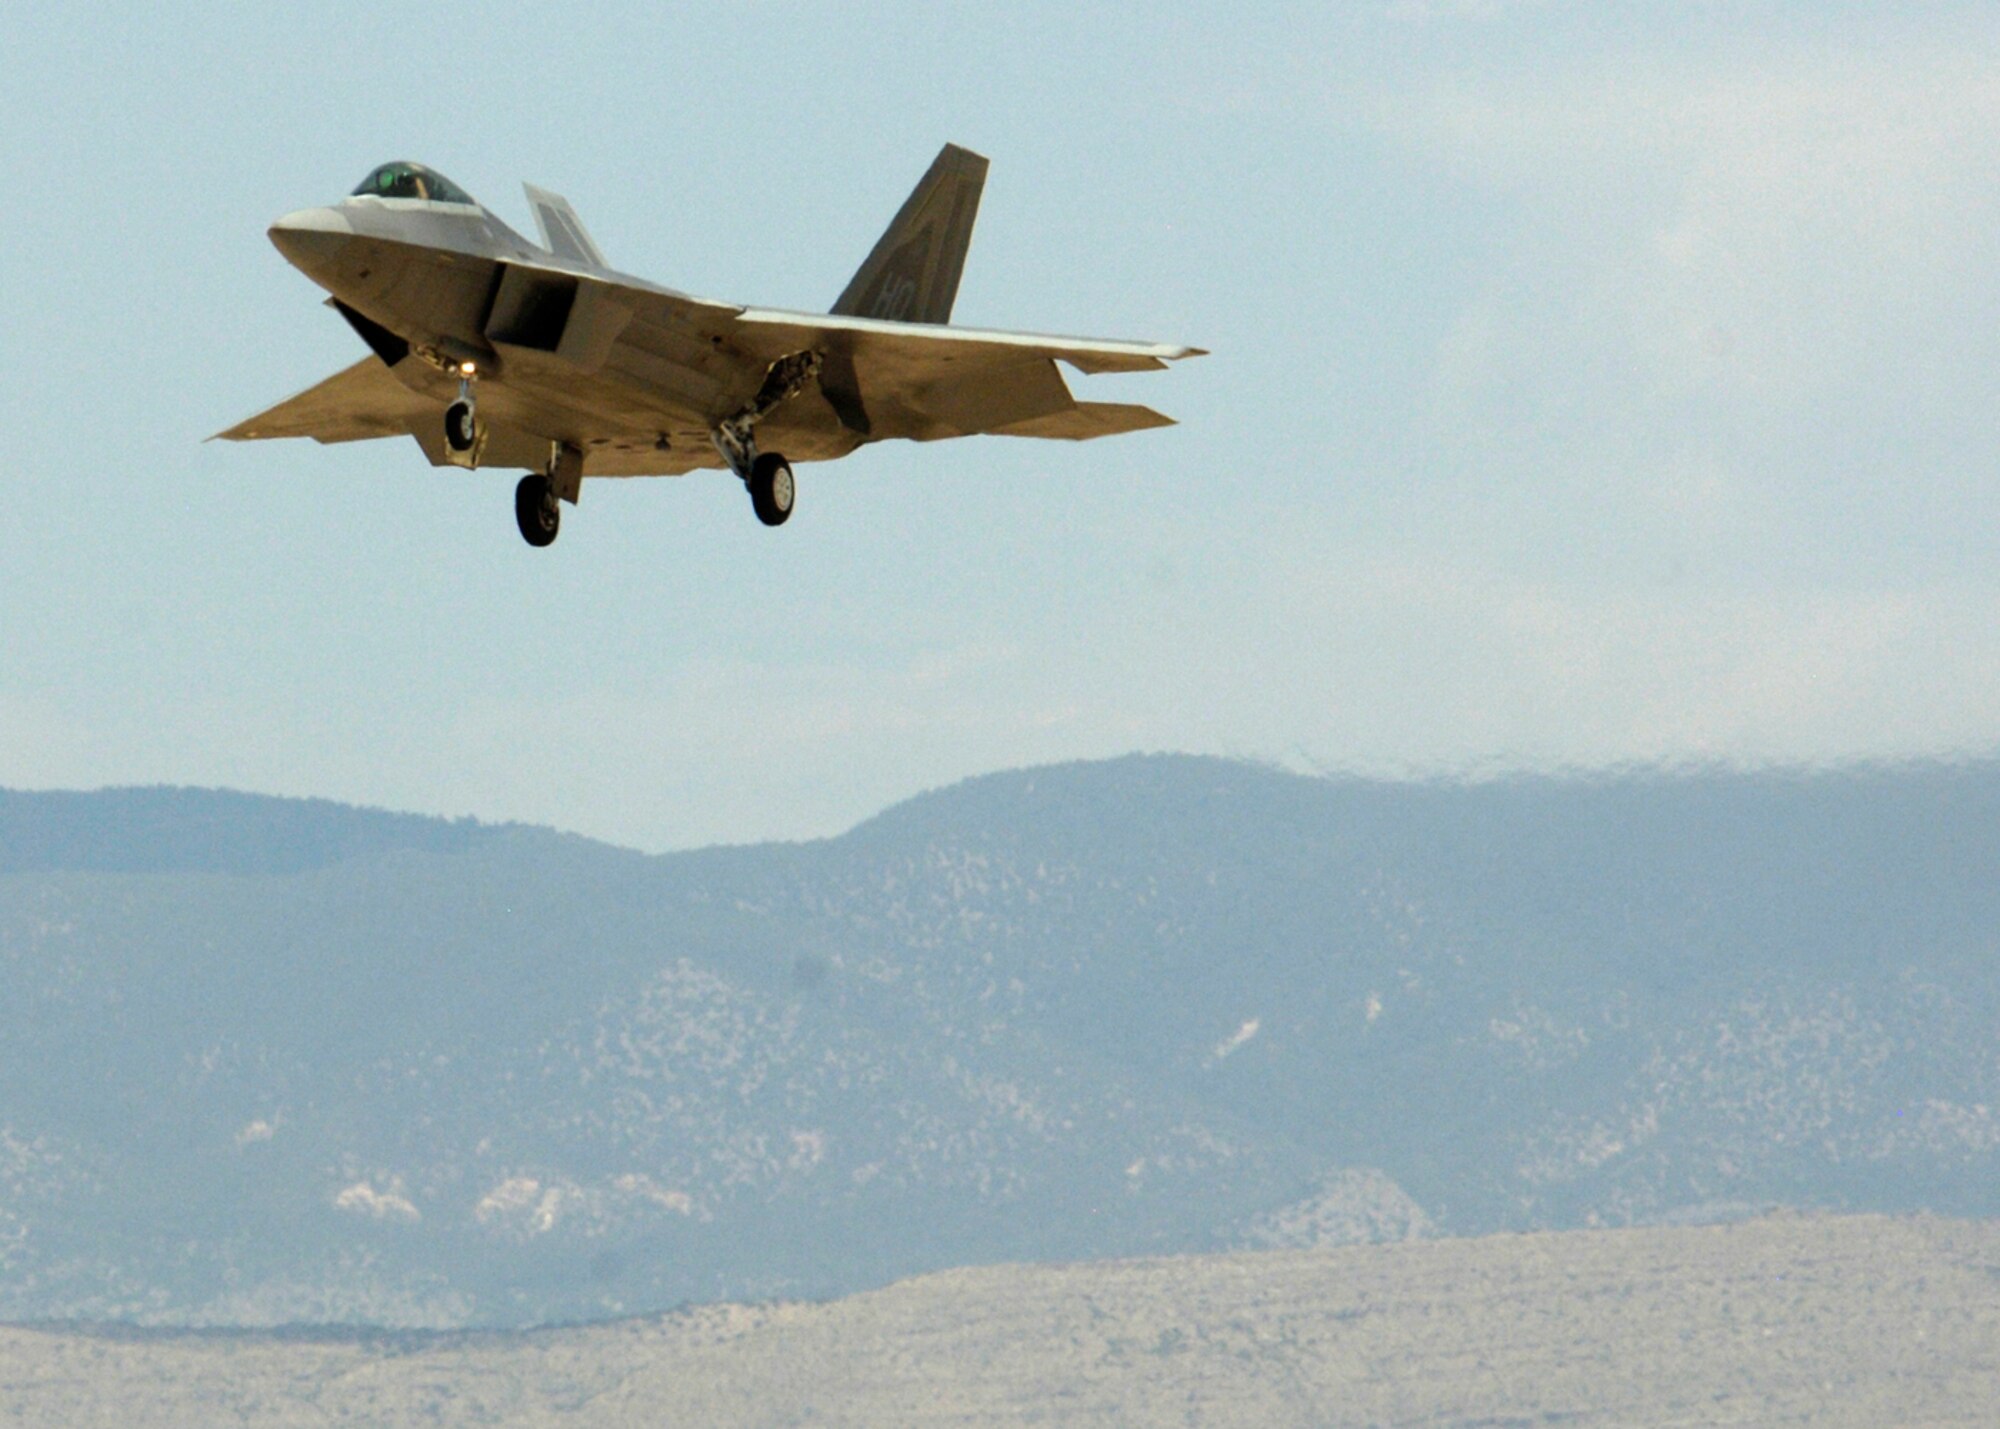 One of two F-22A Raptors prepares to land at Holloman Air Force Base, N.M., June 2. The jets are the first two Holloman-tailed F-22s to arrive on base. Prior to landing, the jets flew over the Tularosa Basin, allowing the local community a chance to witness the future of Holloman. (U.S. Air Force photo/Airman 1st Class Michael Means)